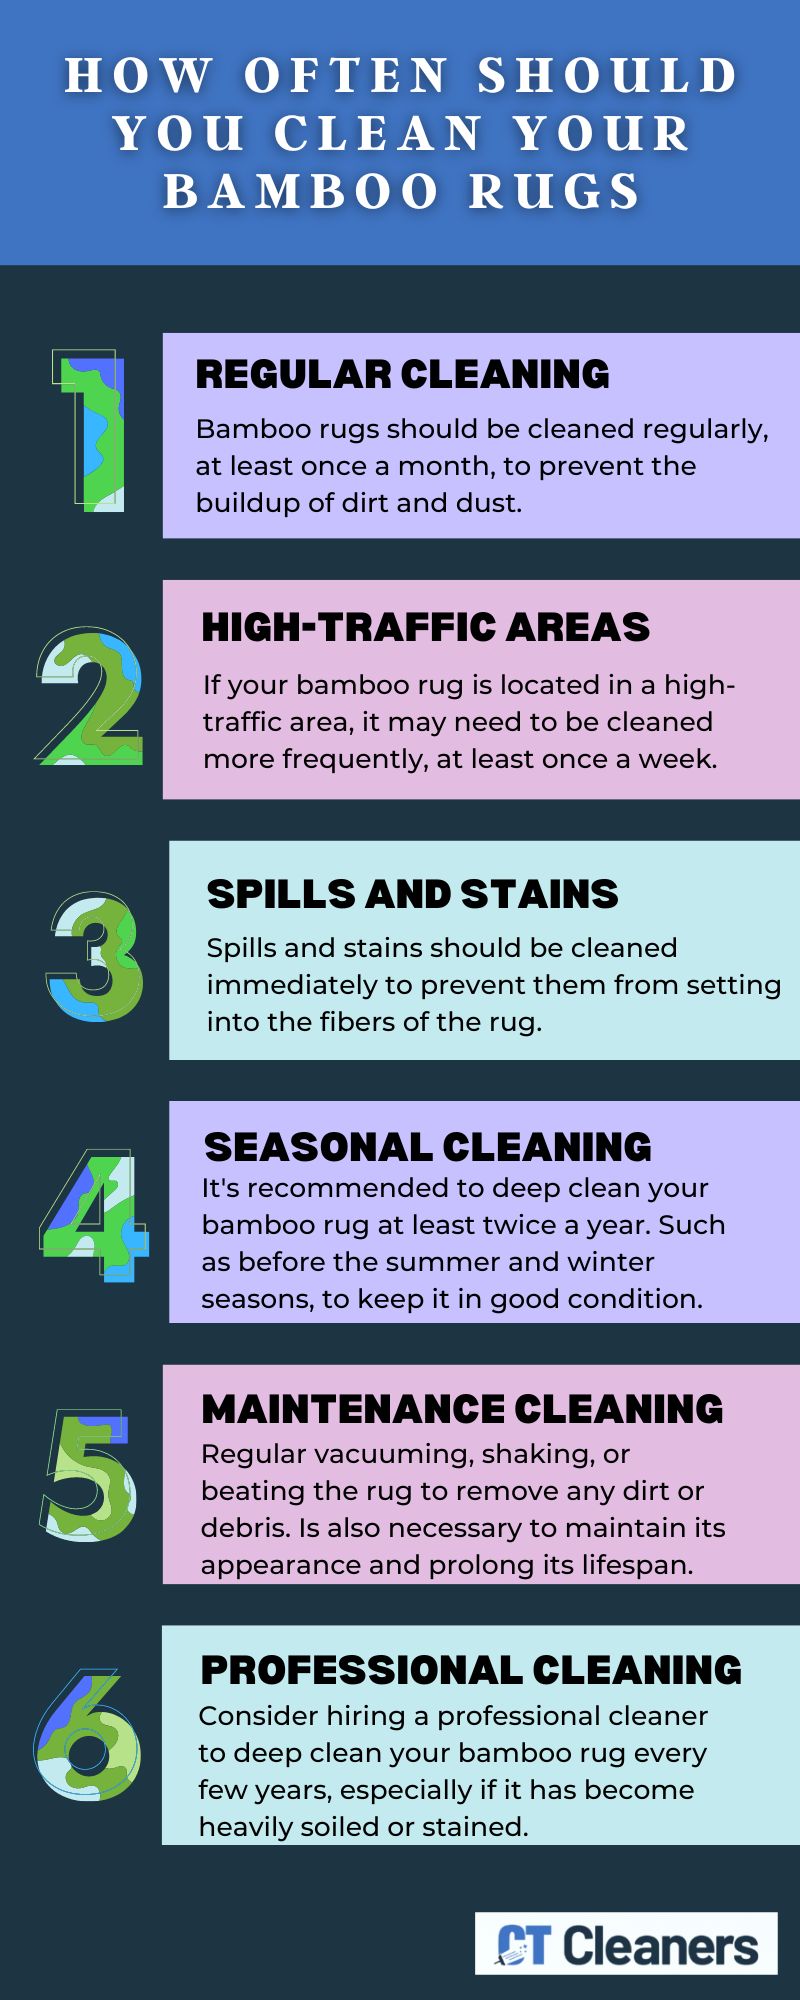 How Often Should you Clean Your Bamboo Rugs